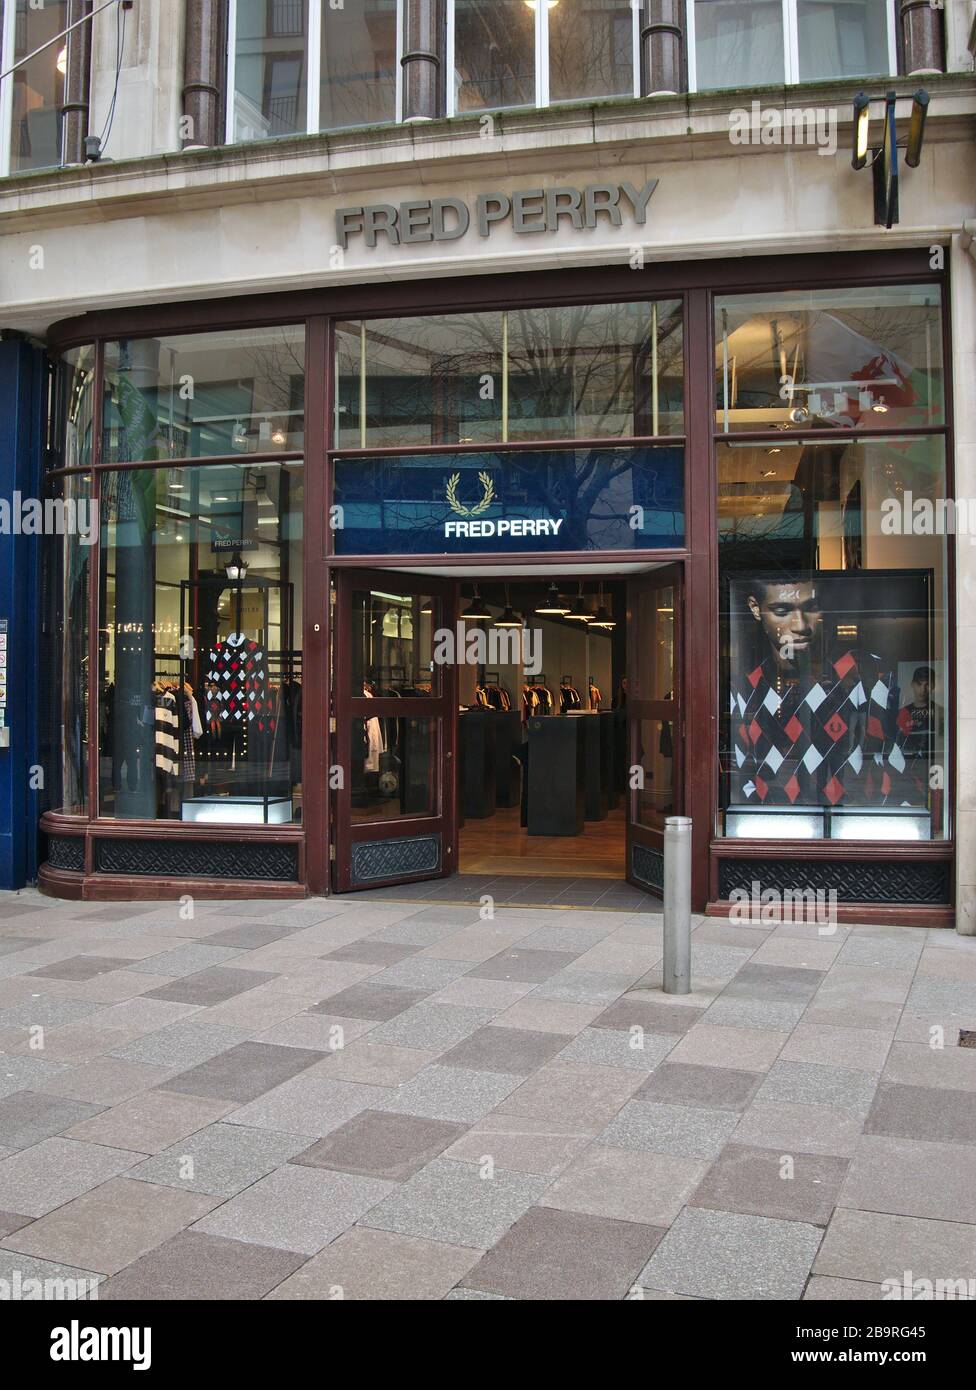 Fred Perry shop, Cardiff, Wales UK Stock Photo - Alamy